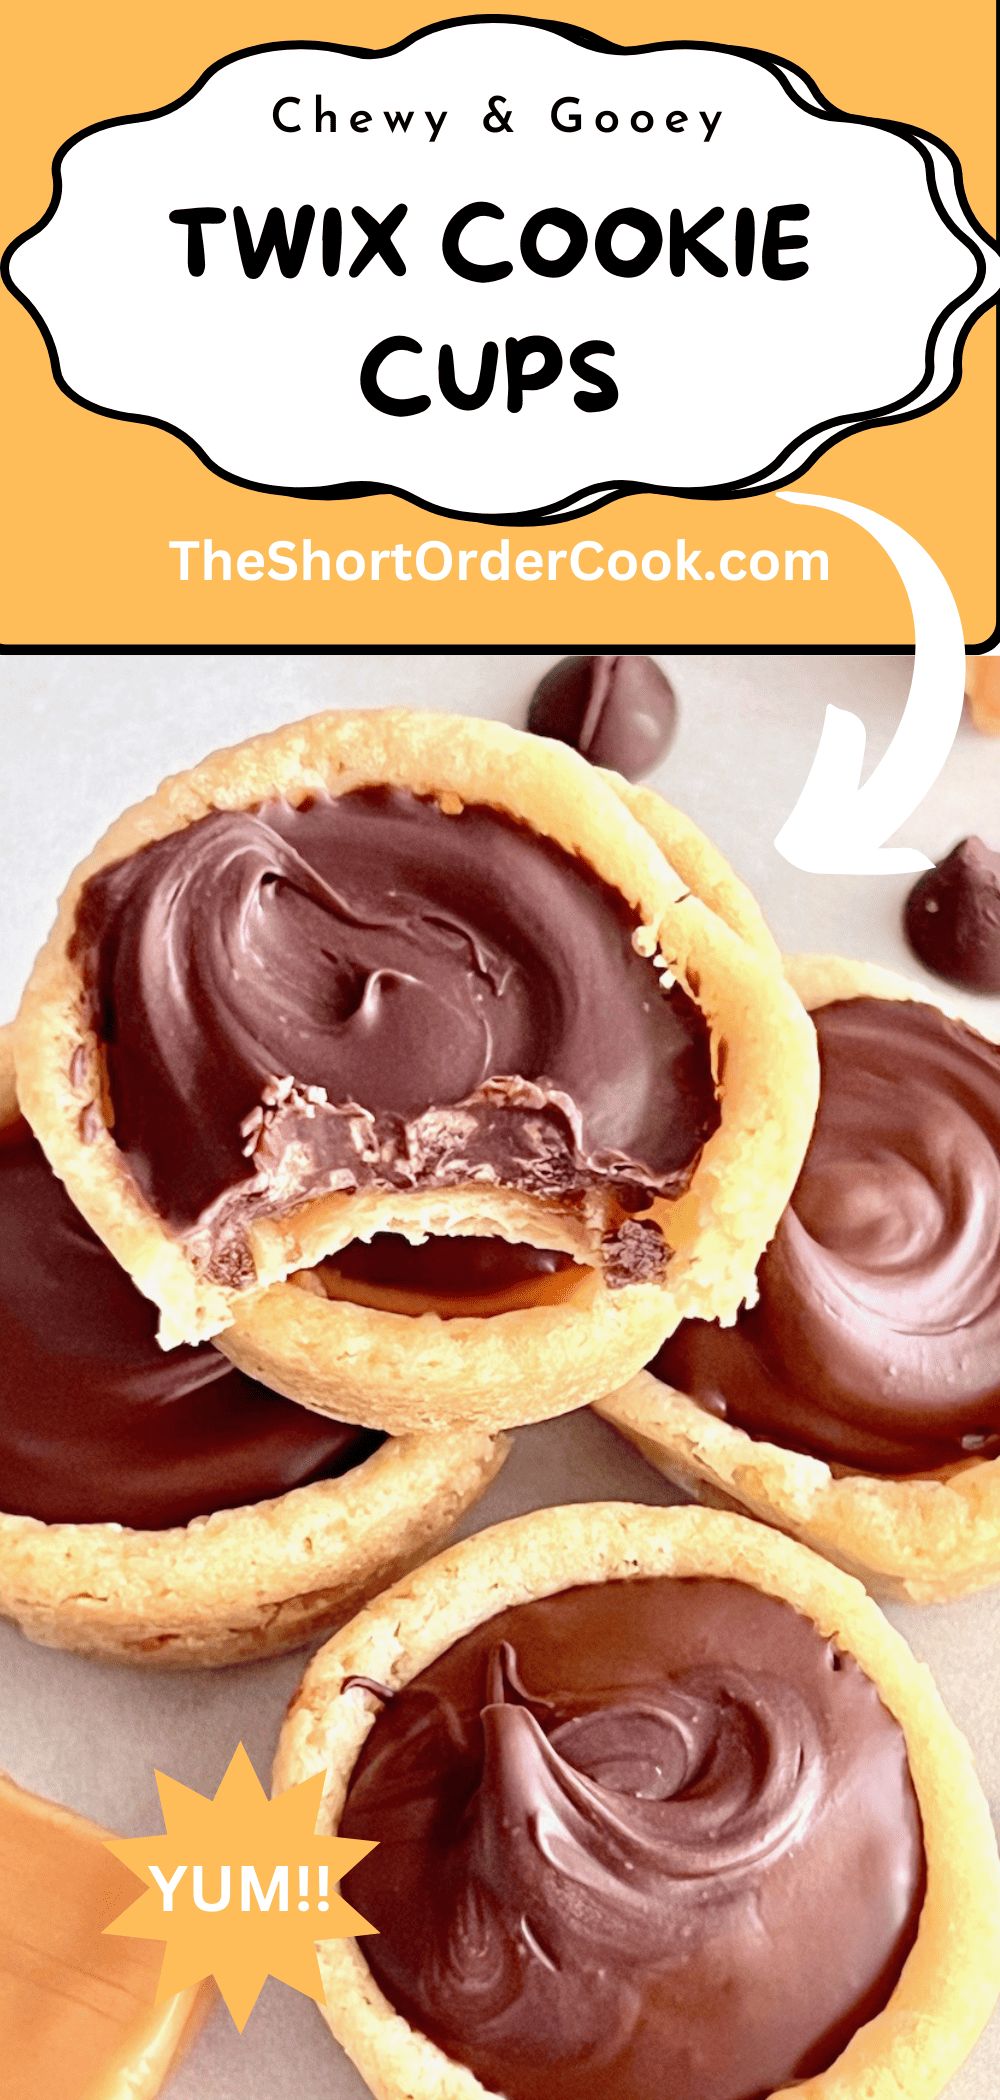 Sugar cookie cups filled with caramel and chocolate.